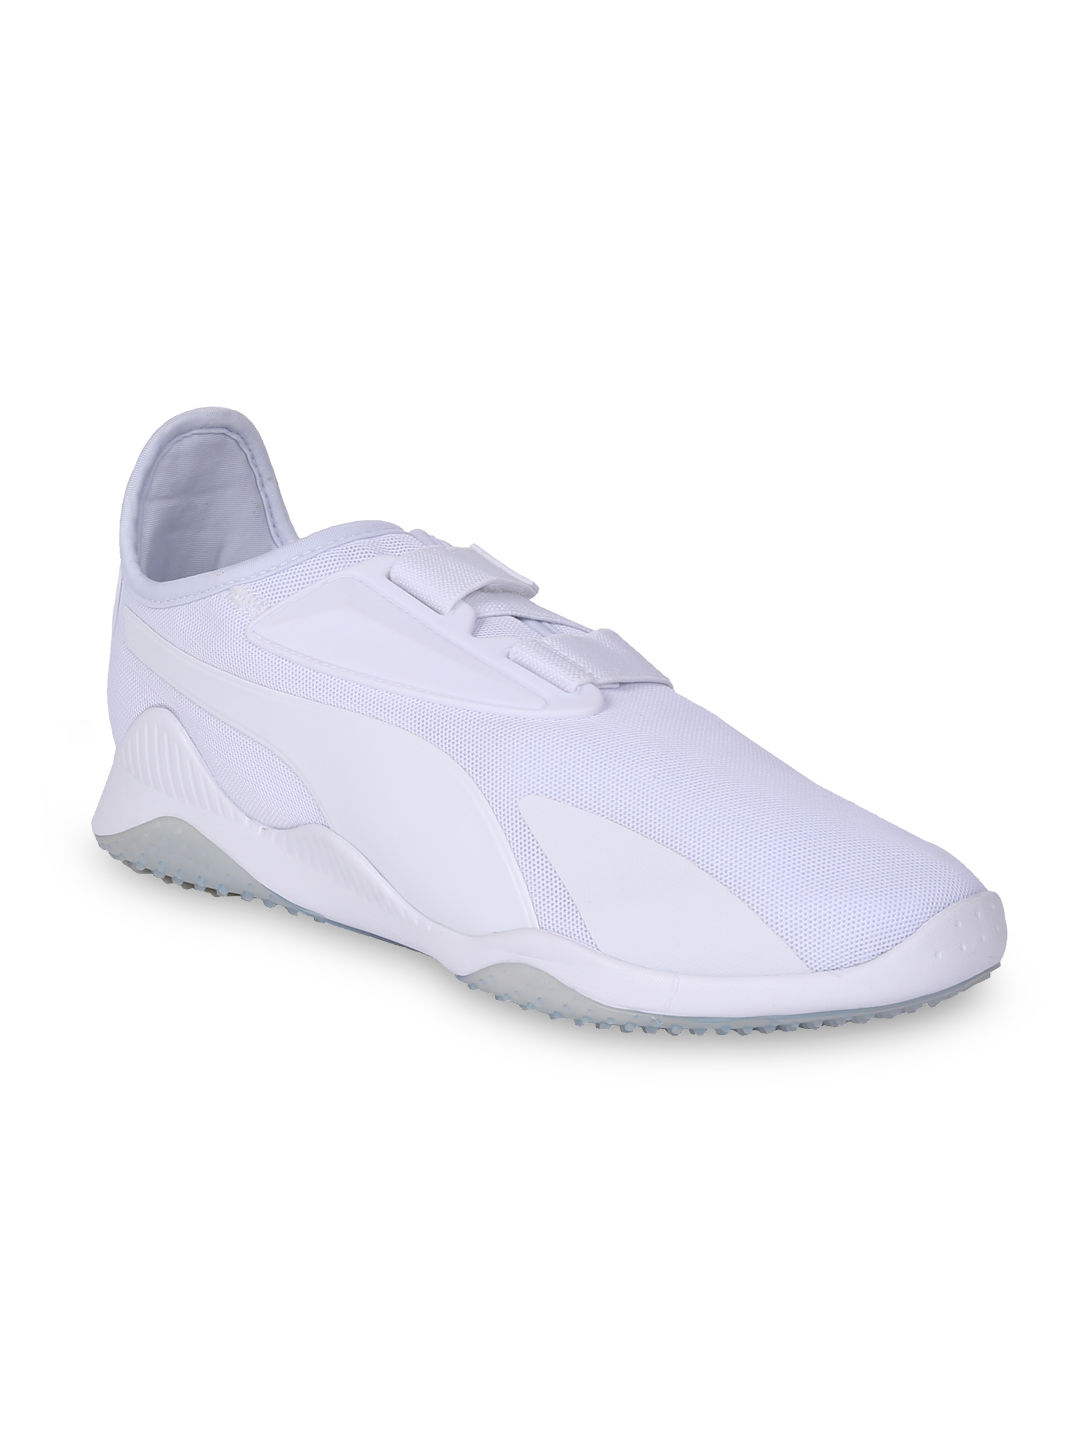 poco mayoria Siempre Puma Mostro Mesh Unisex Casual Shoes - White (12): Buy Puma Mostro Mesh  Unisex Casual Shoes - White (12) Online at Best Price in India | Nykaa